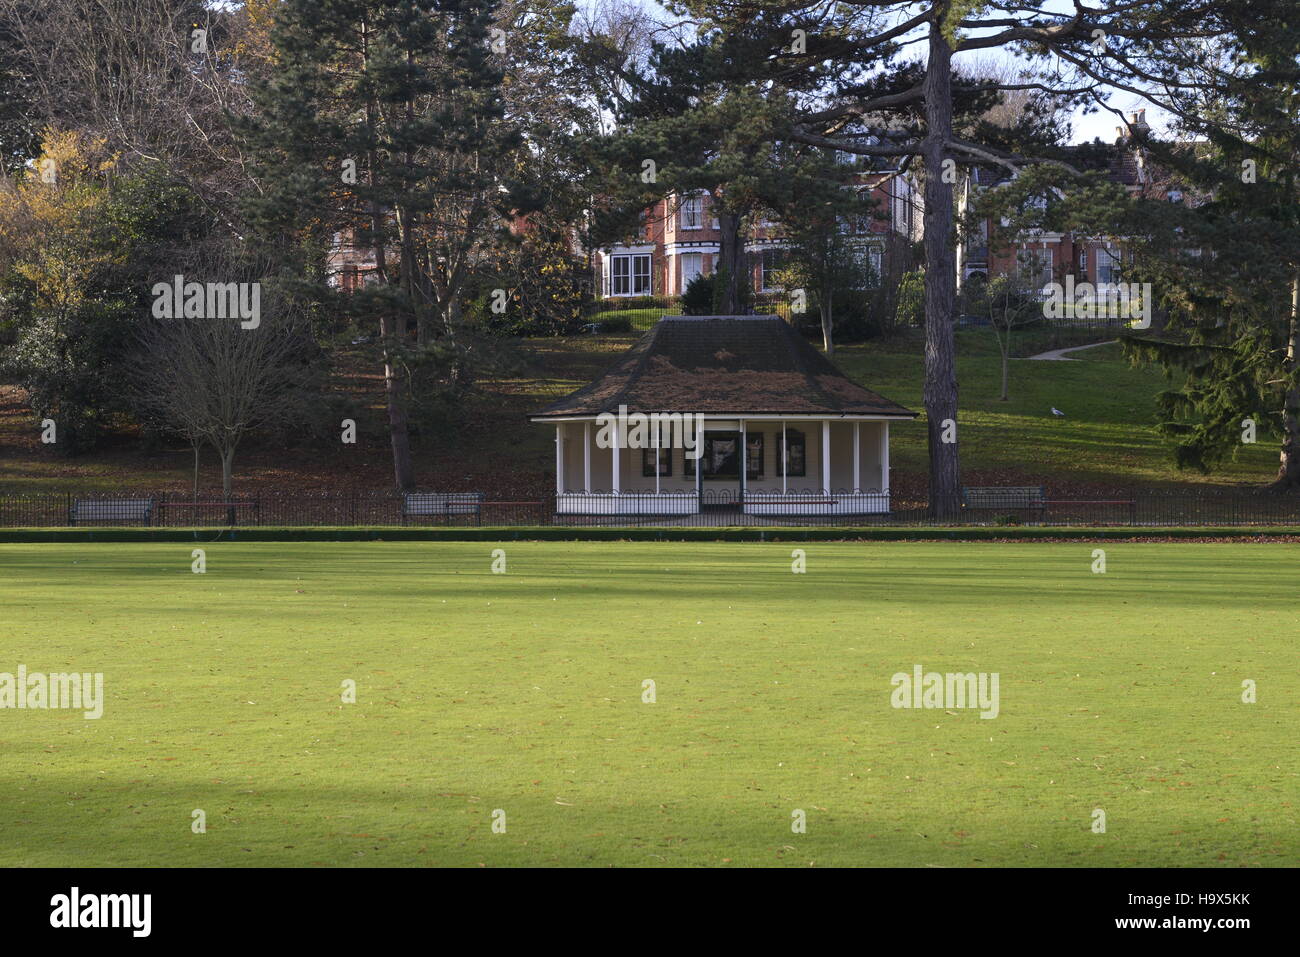 Alexandra and Clive Vale Bowls Club green, Alexandra Park, Hastings Stock Photo